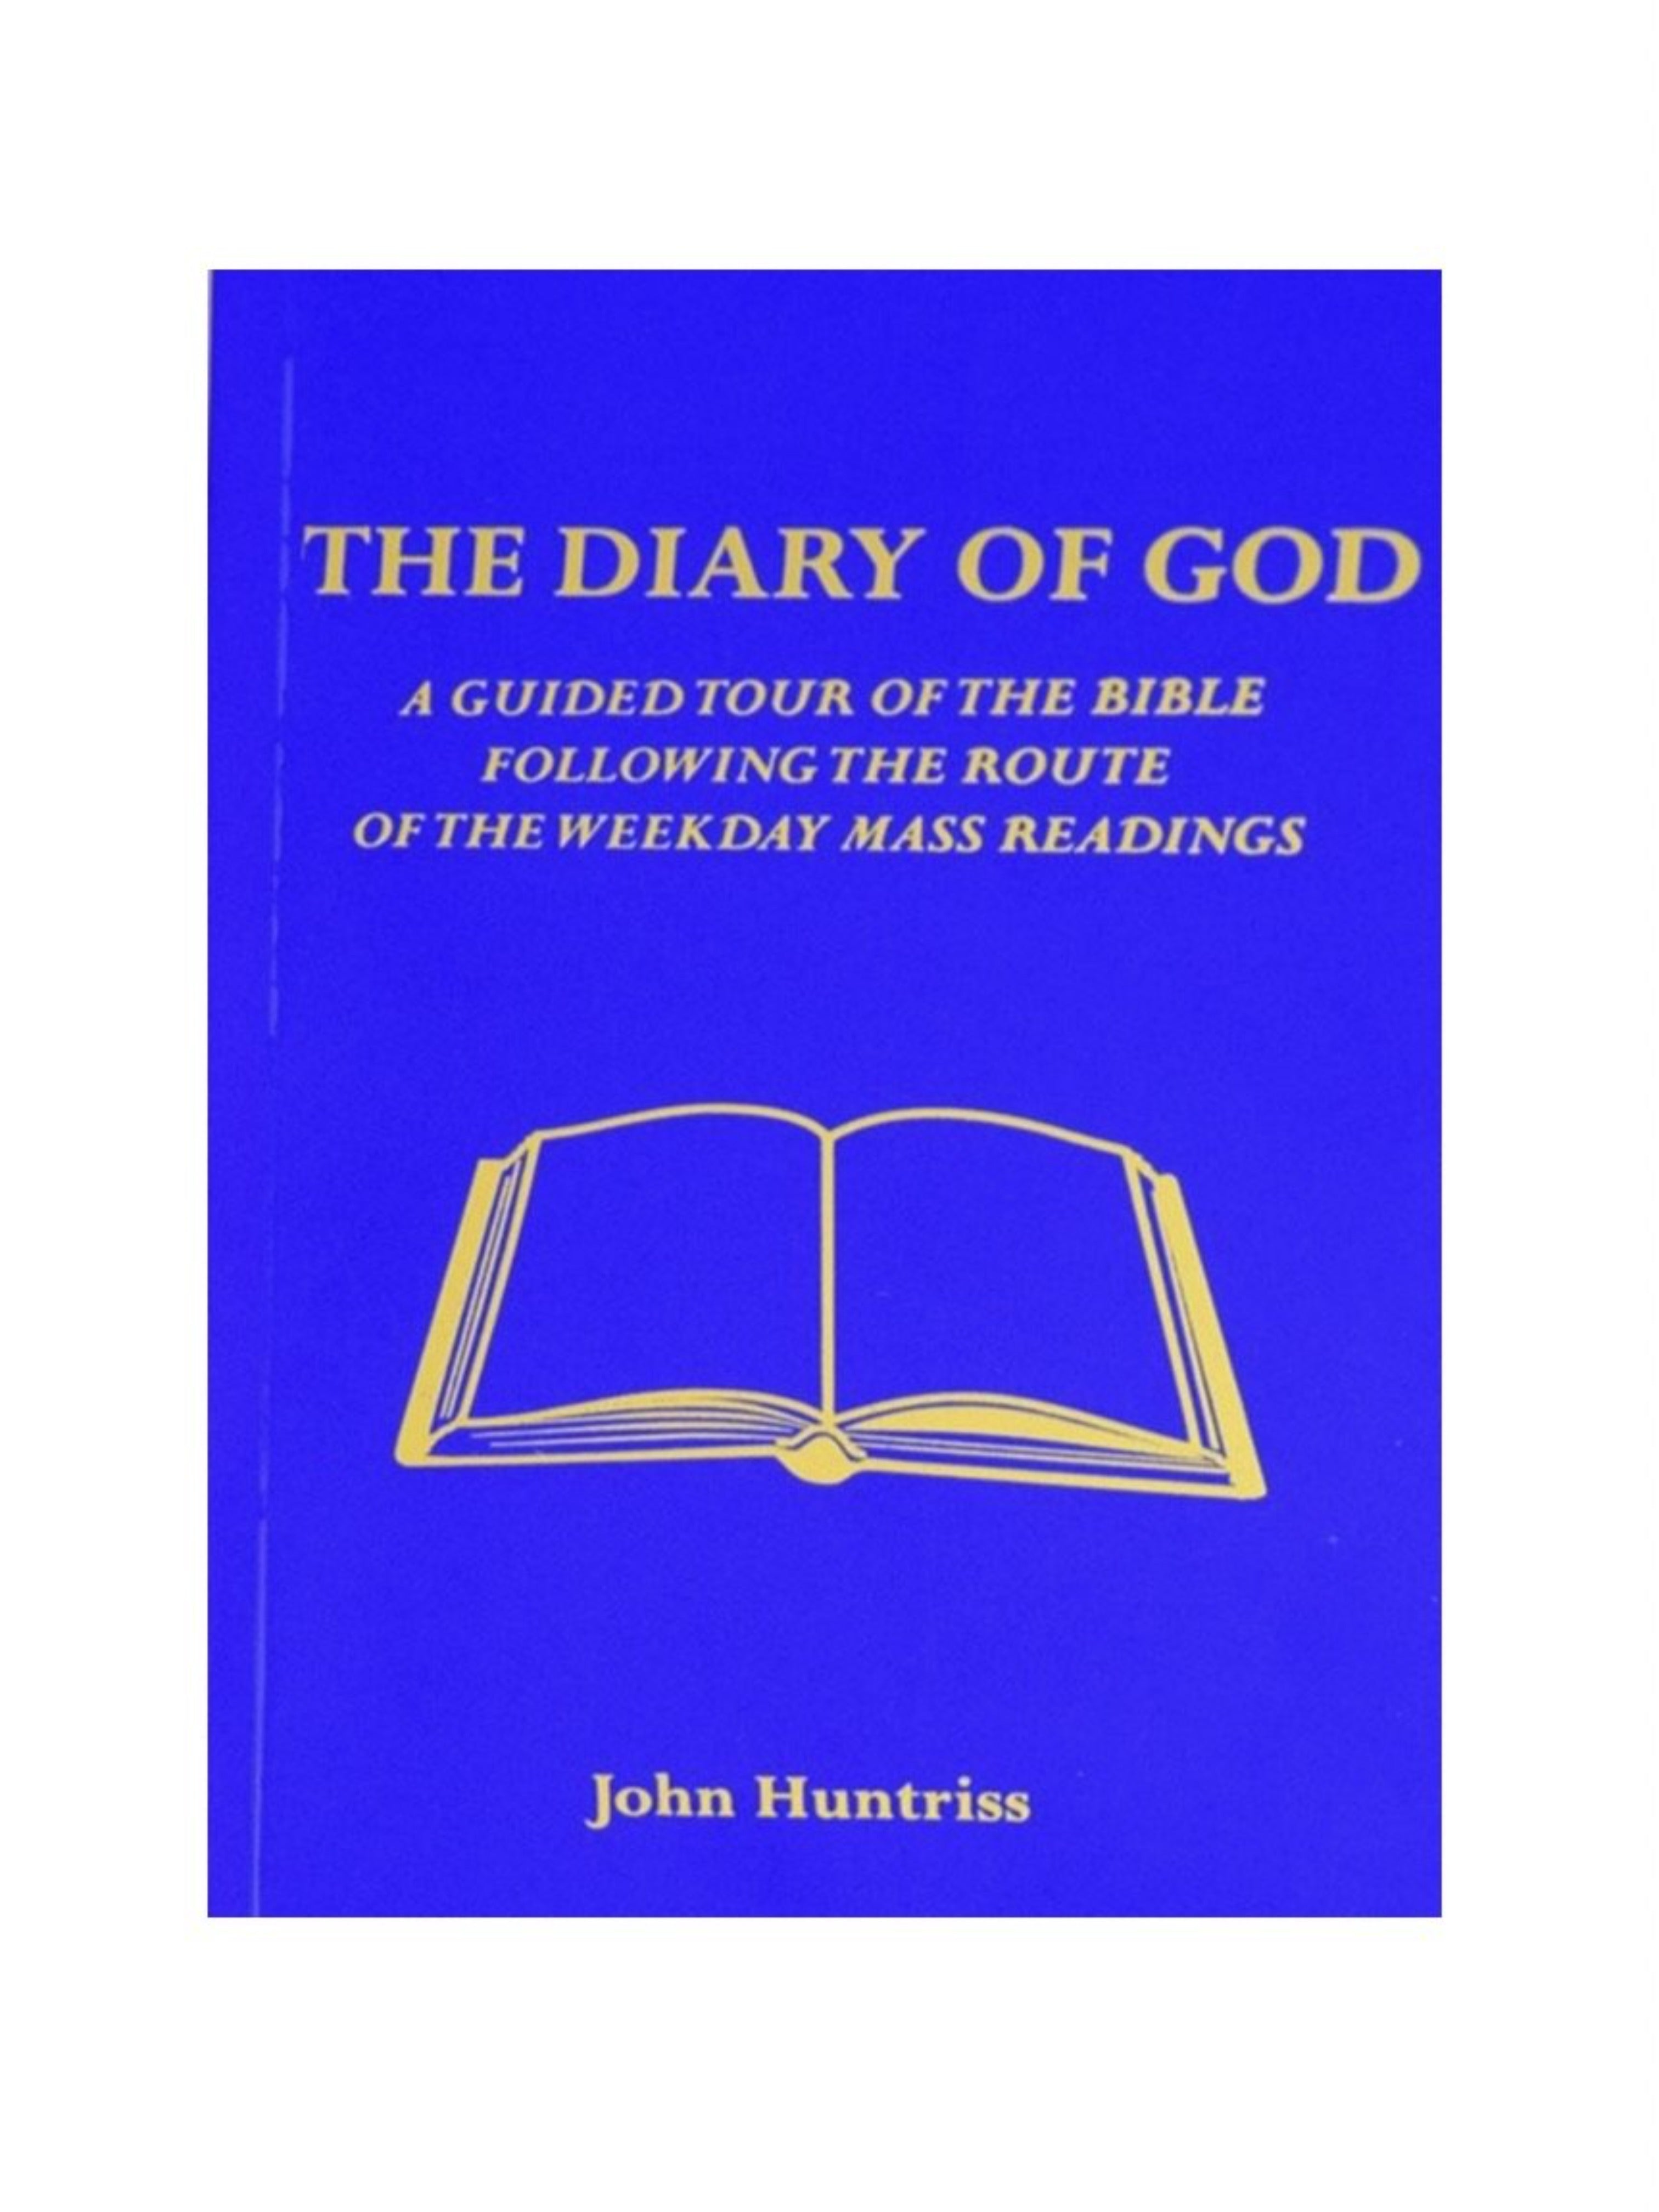 The Diary of God